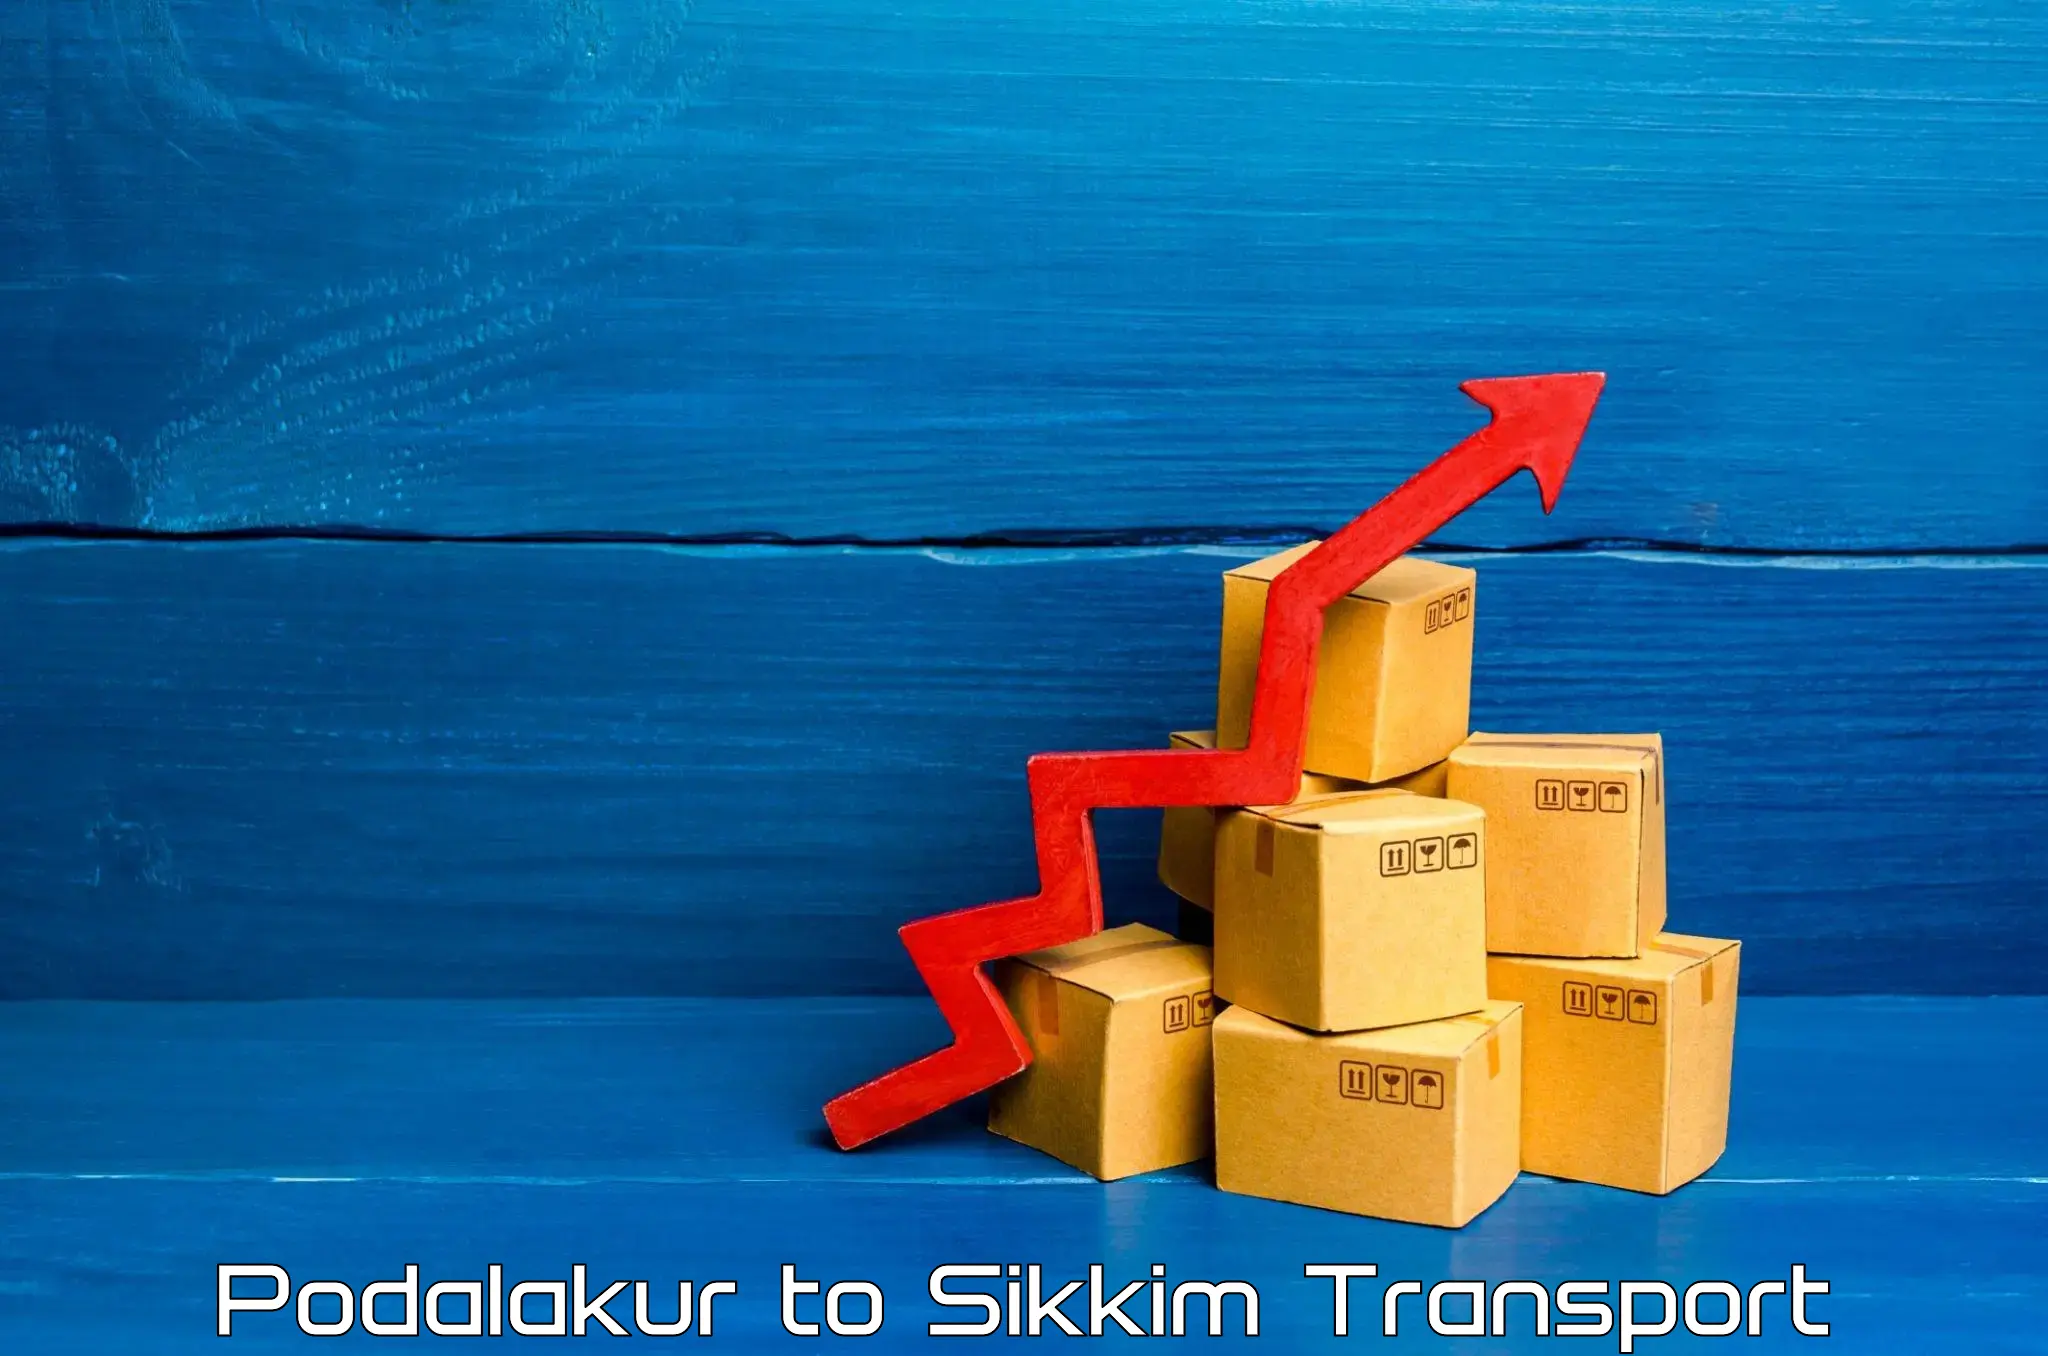 Container transport service Podalakur to Gangtok